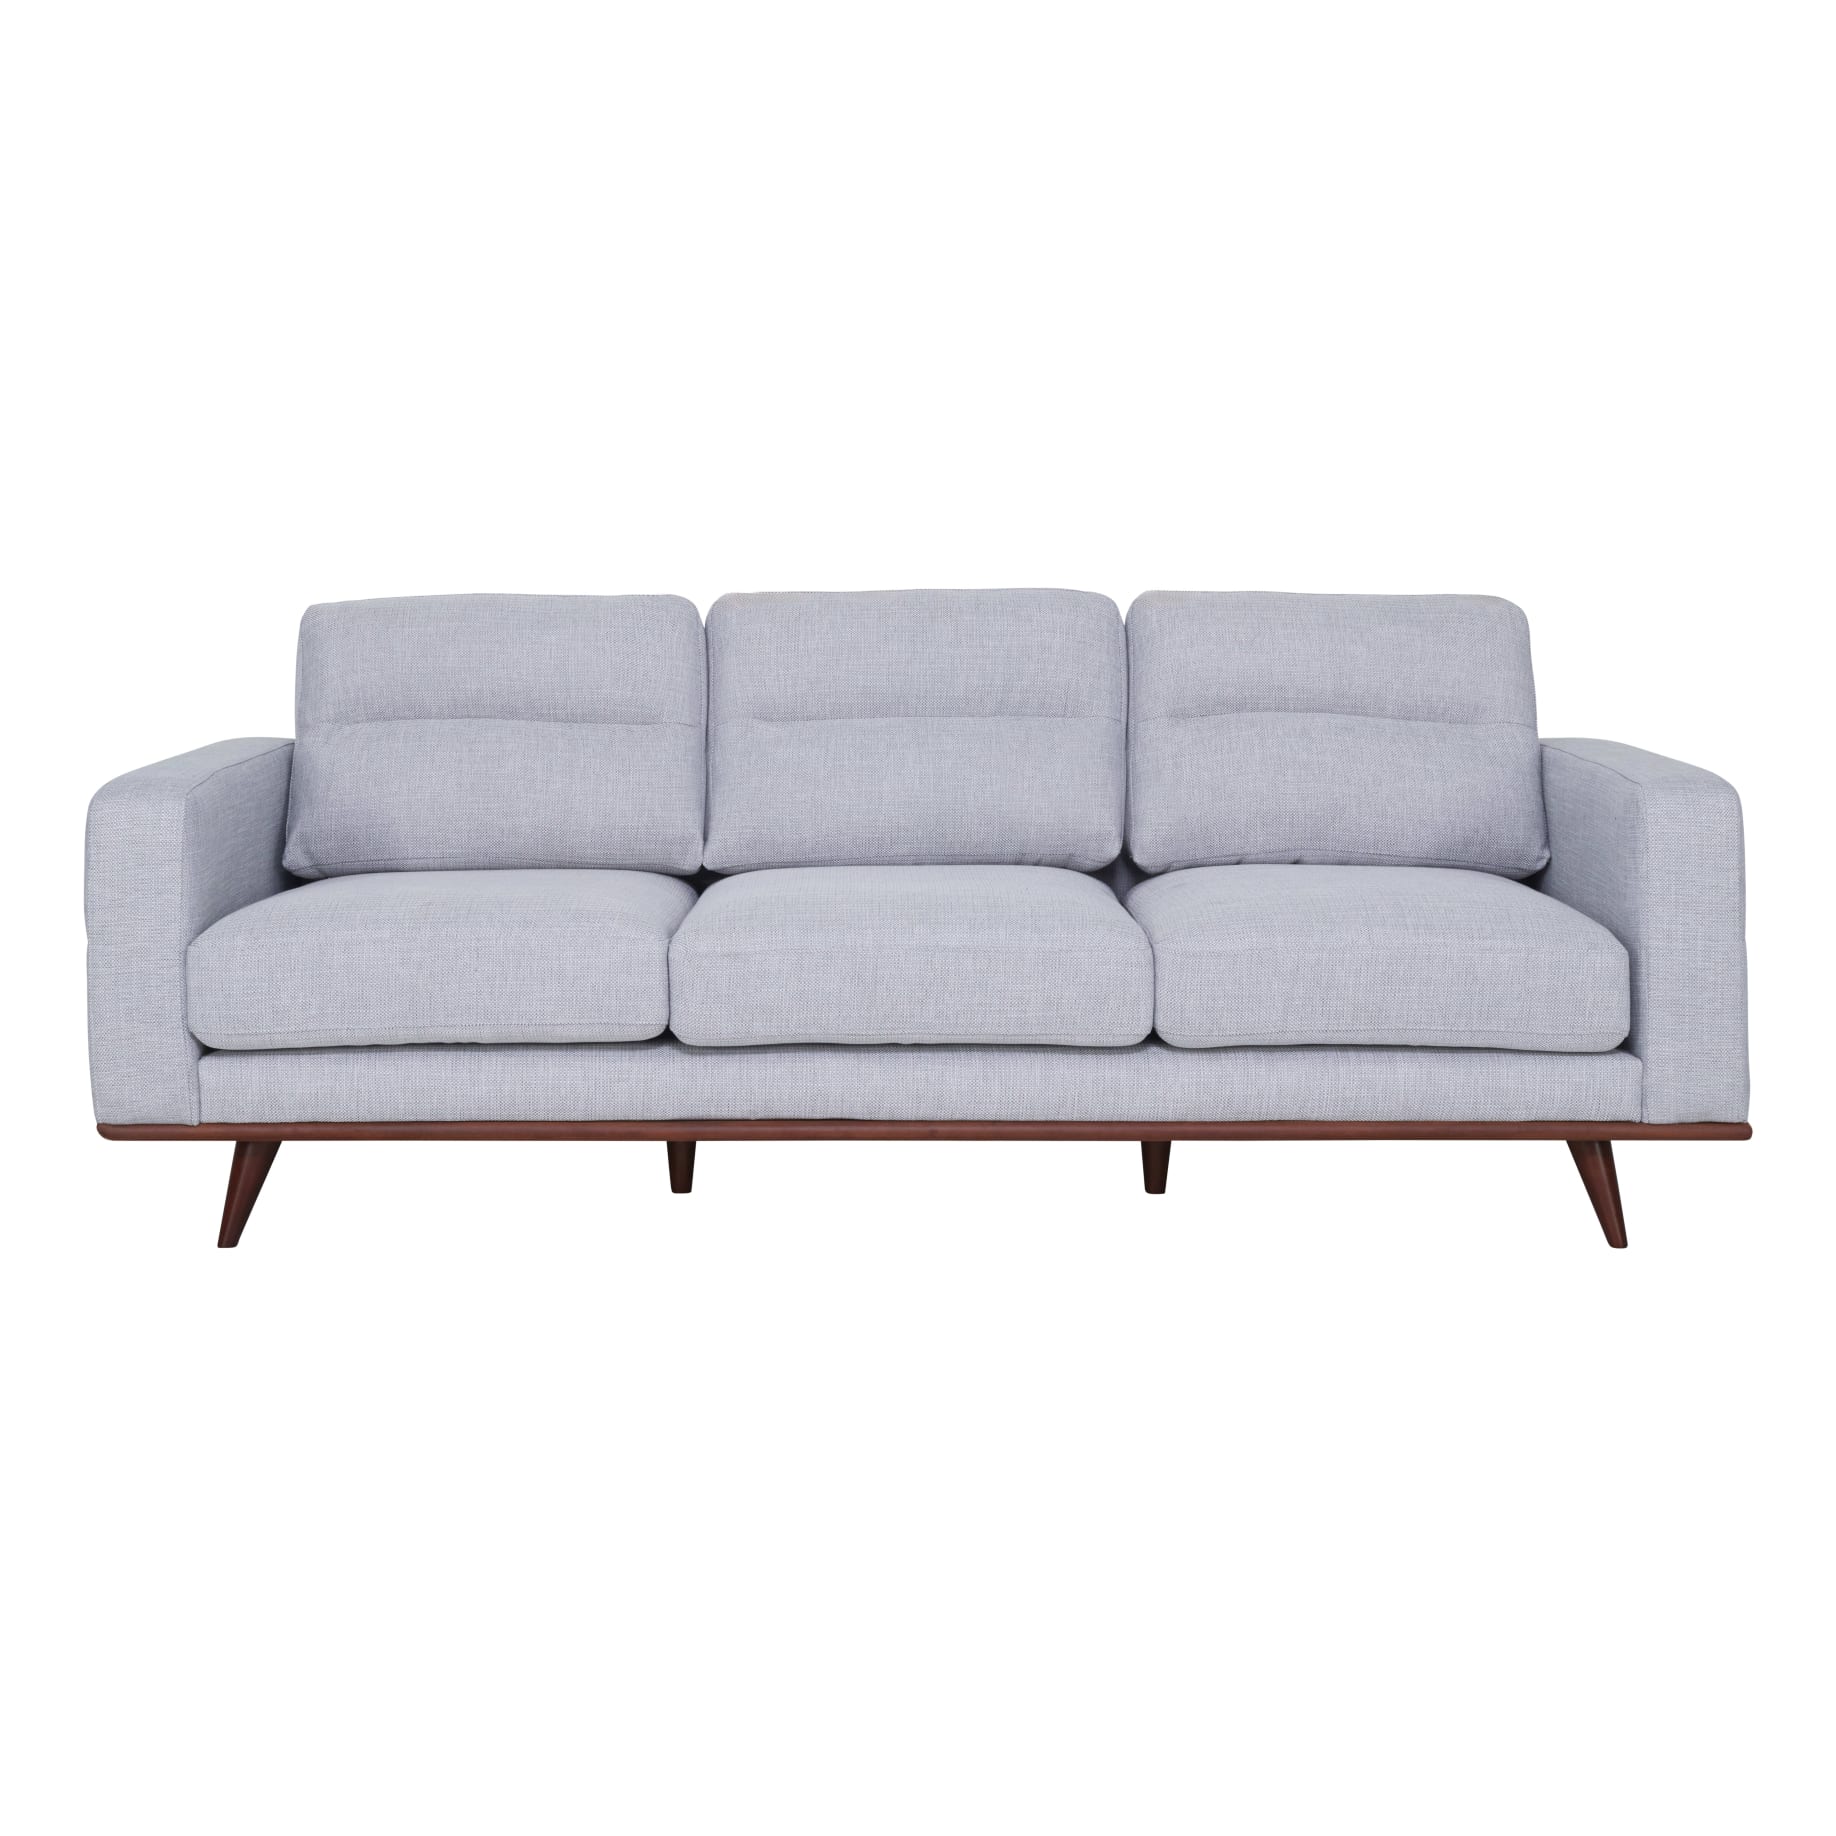 Astrid 3 Seater Sofa in Talent Silver